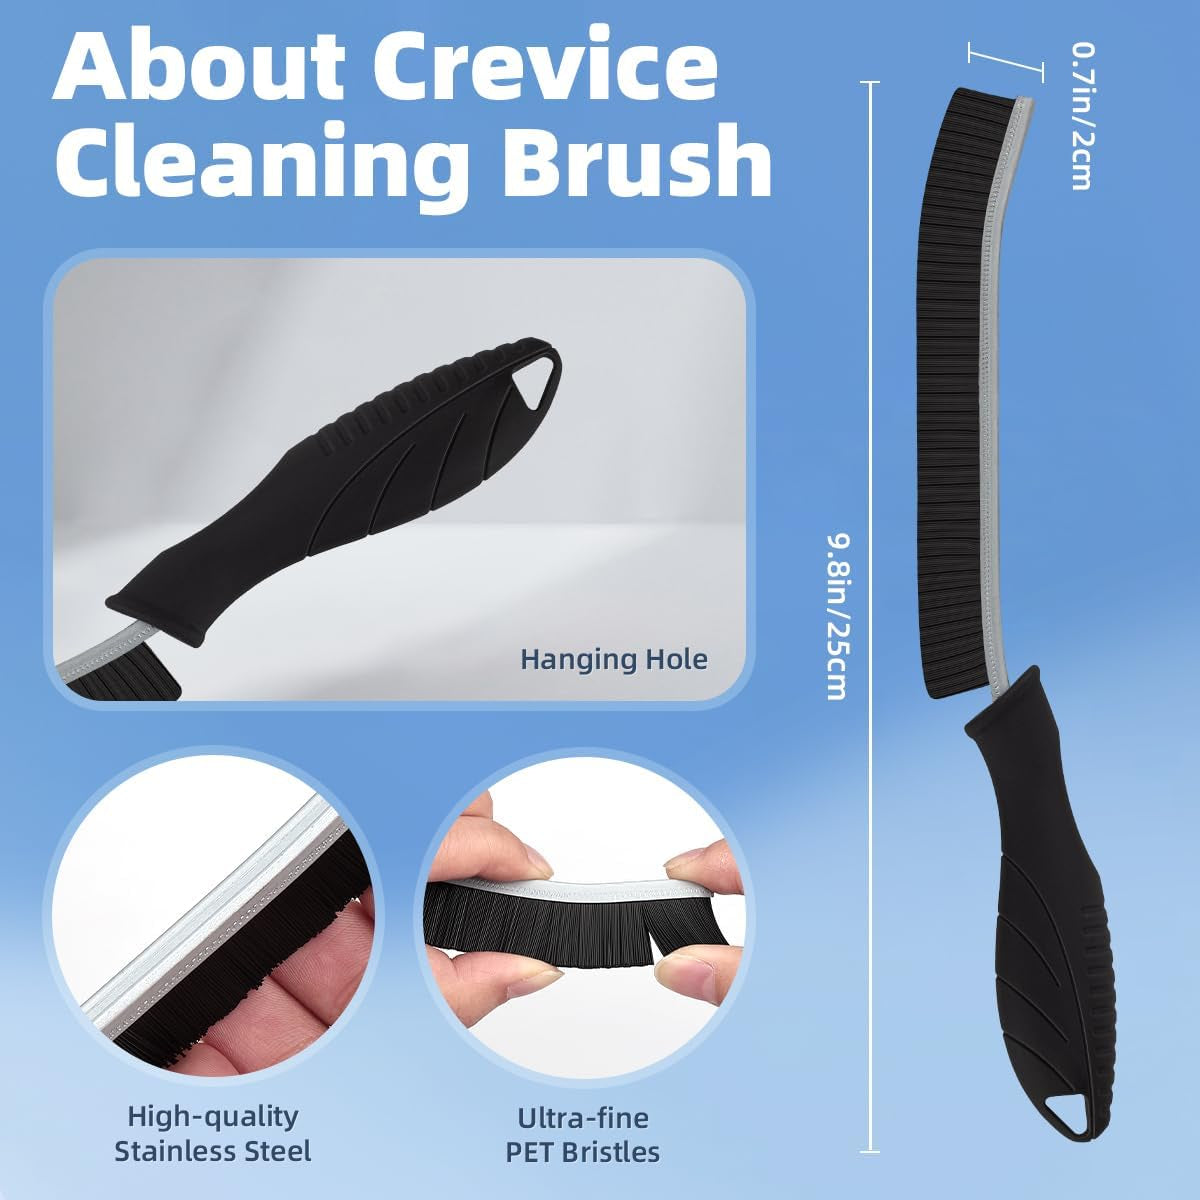 Offer For 3 Pcs Hard Bristle Crevice Cleaning Brush-Thin Gap Cleaning Brush, Small Cleaning Brush, Grout Brush, Kitchen Brush, Cleaning Tools for Toilet, Bathroom, Home, Bathtub, Sink, Household, Window MowerShop